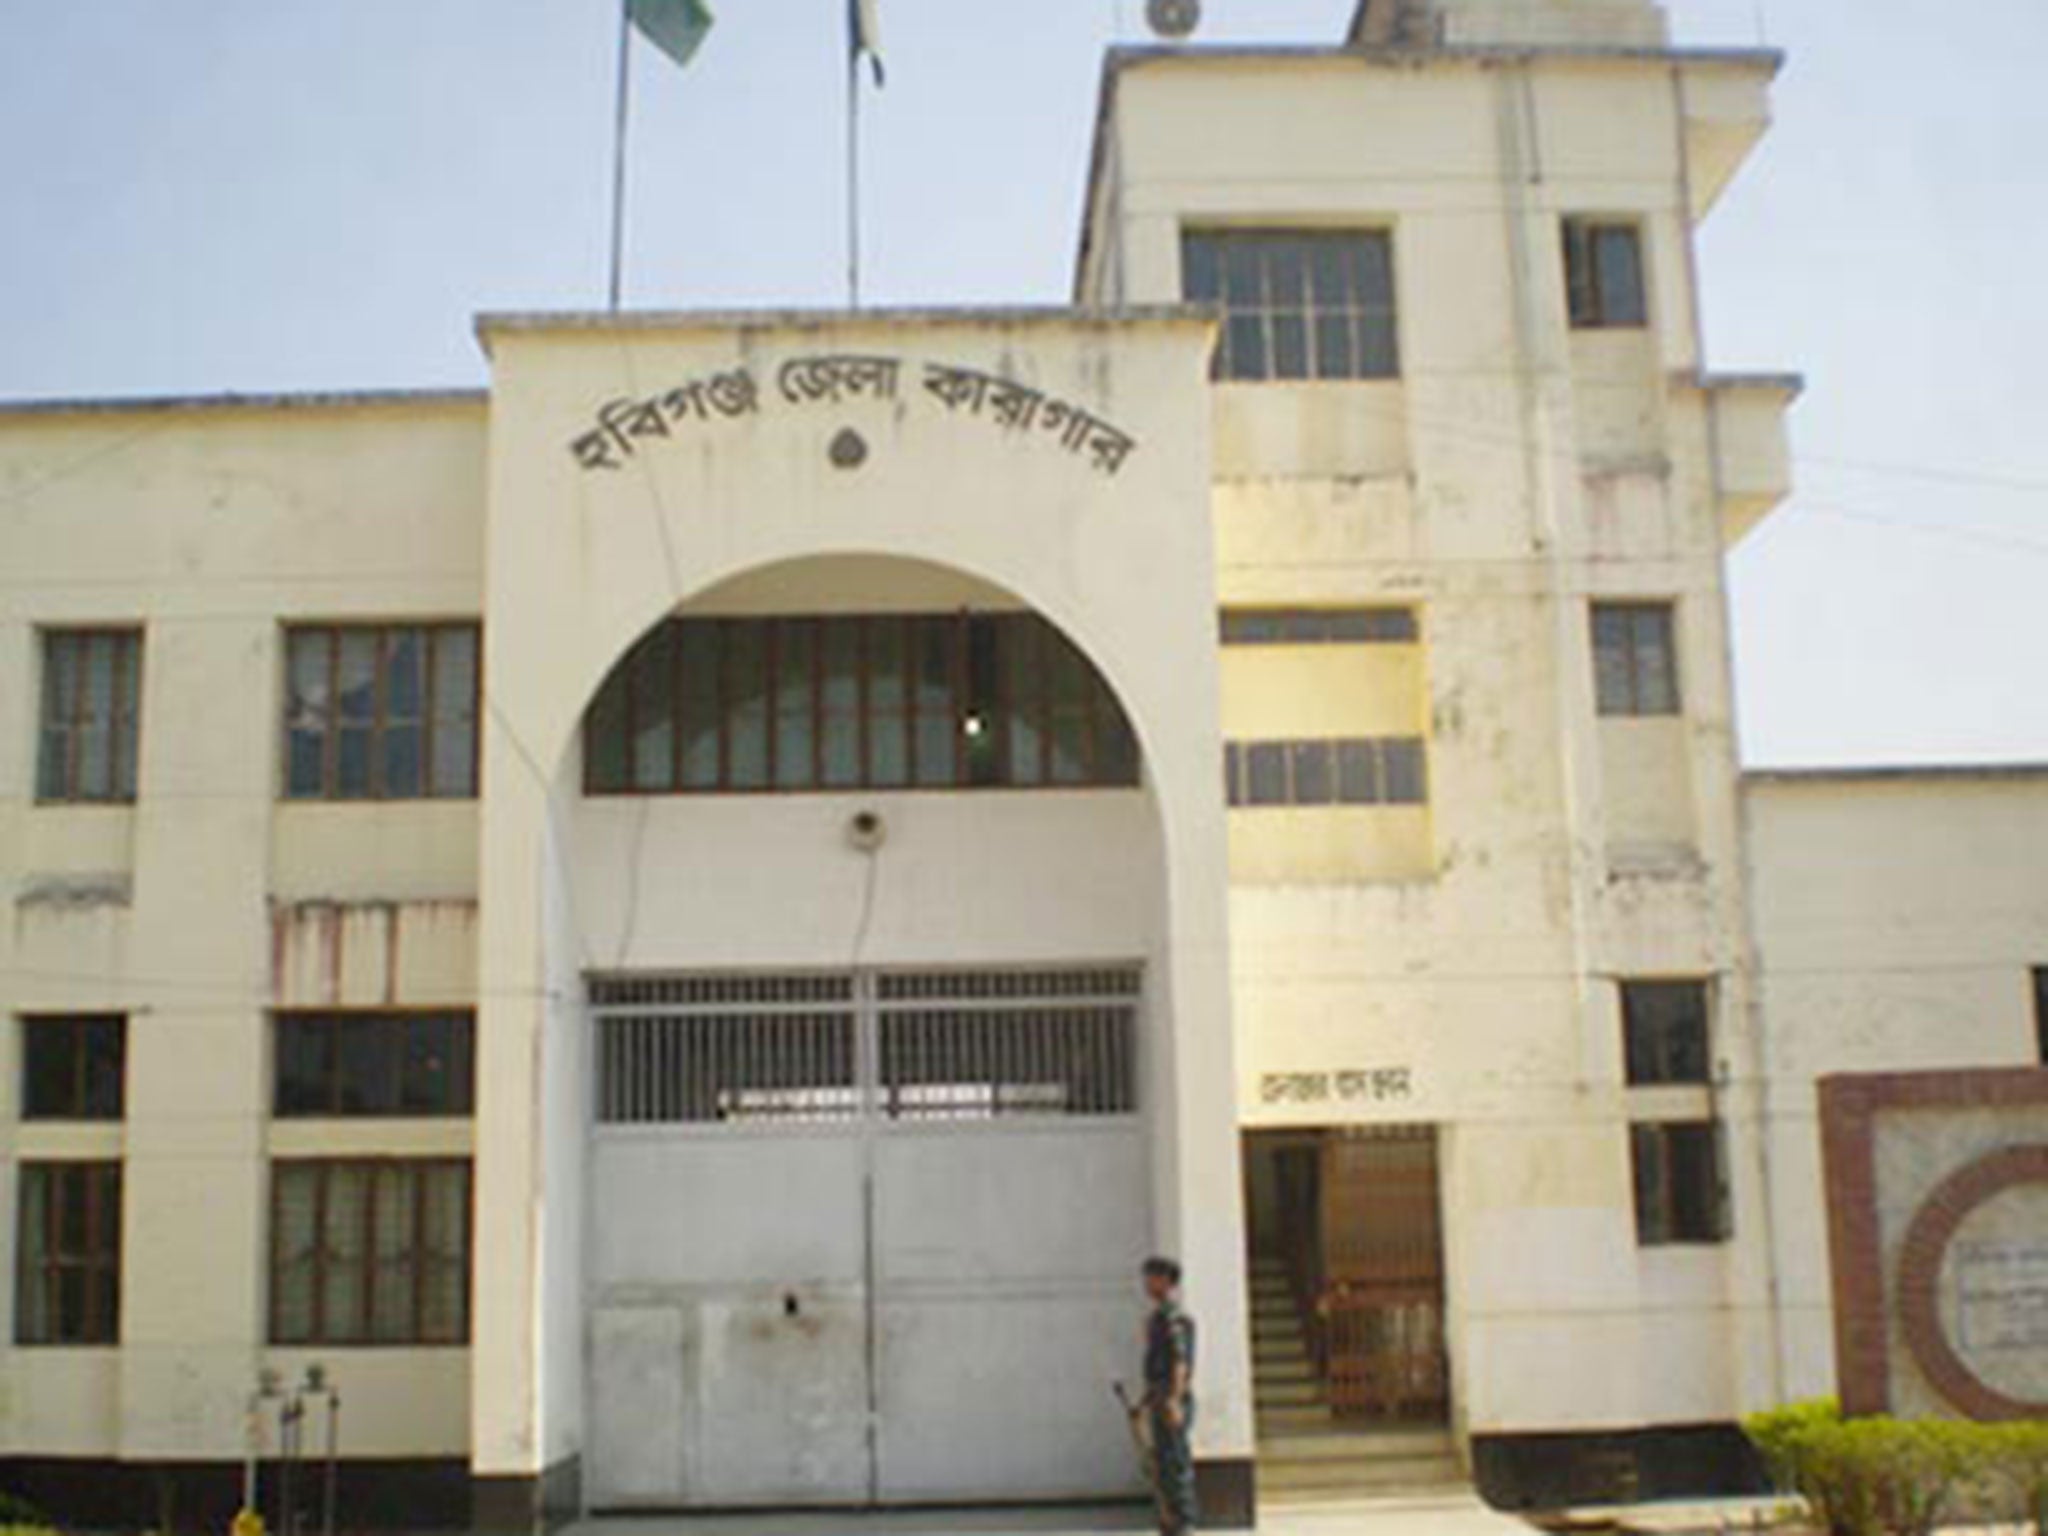 Mr Rahman has been held for two months in Habigonj prison, north-east of Dhaka